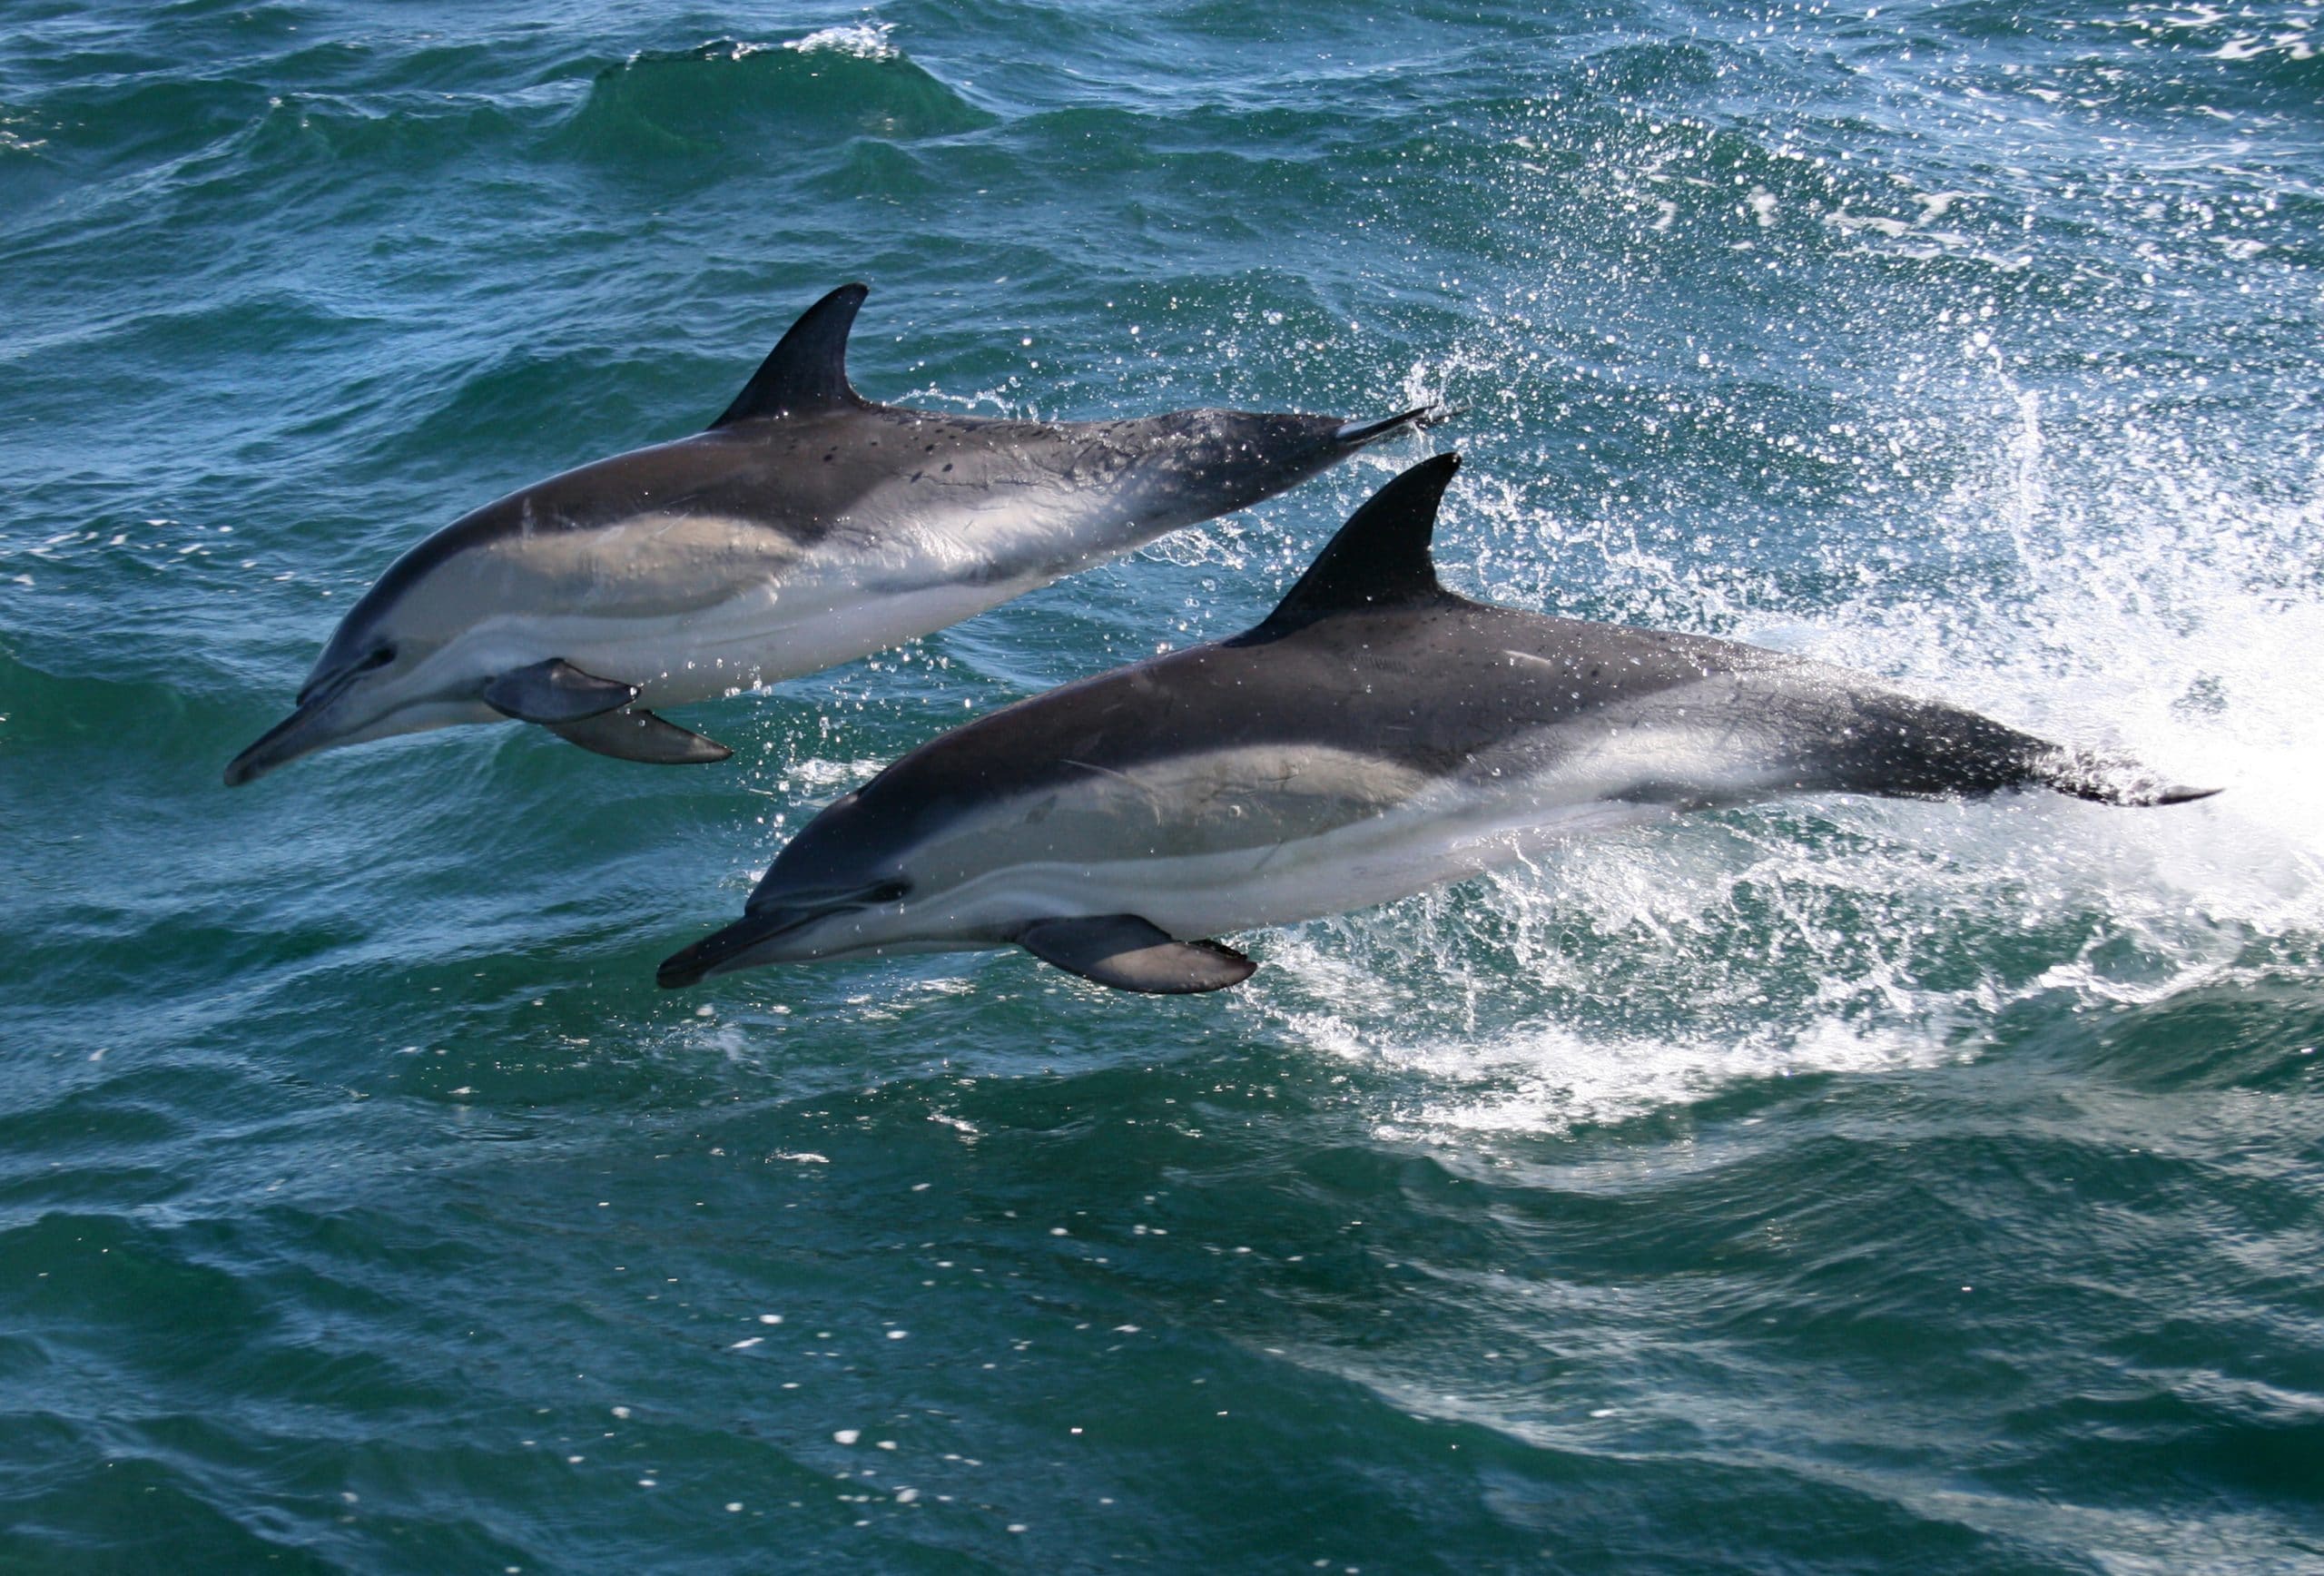 Spot wild dolphins in the Atlantic